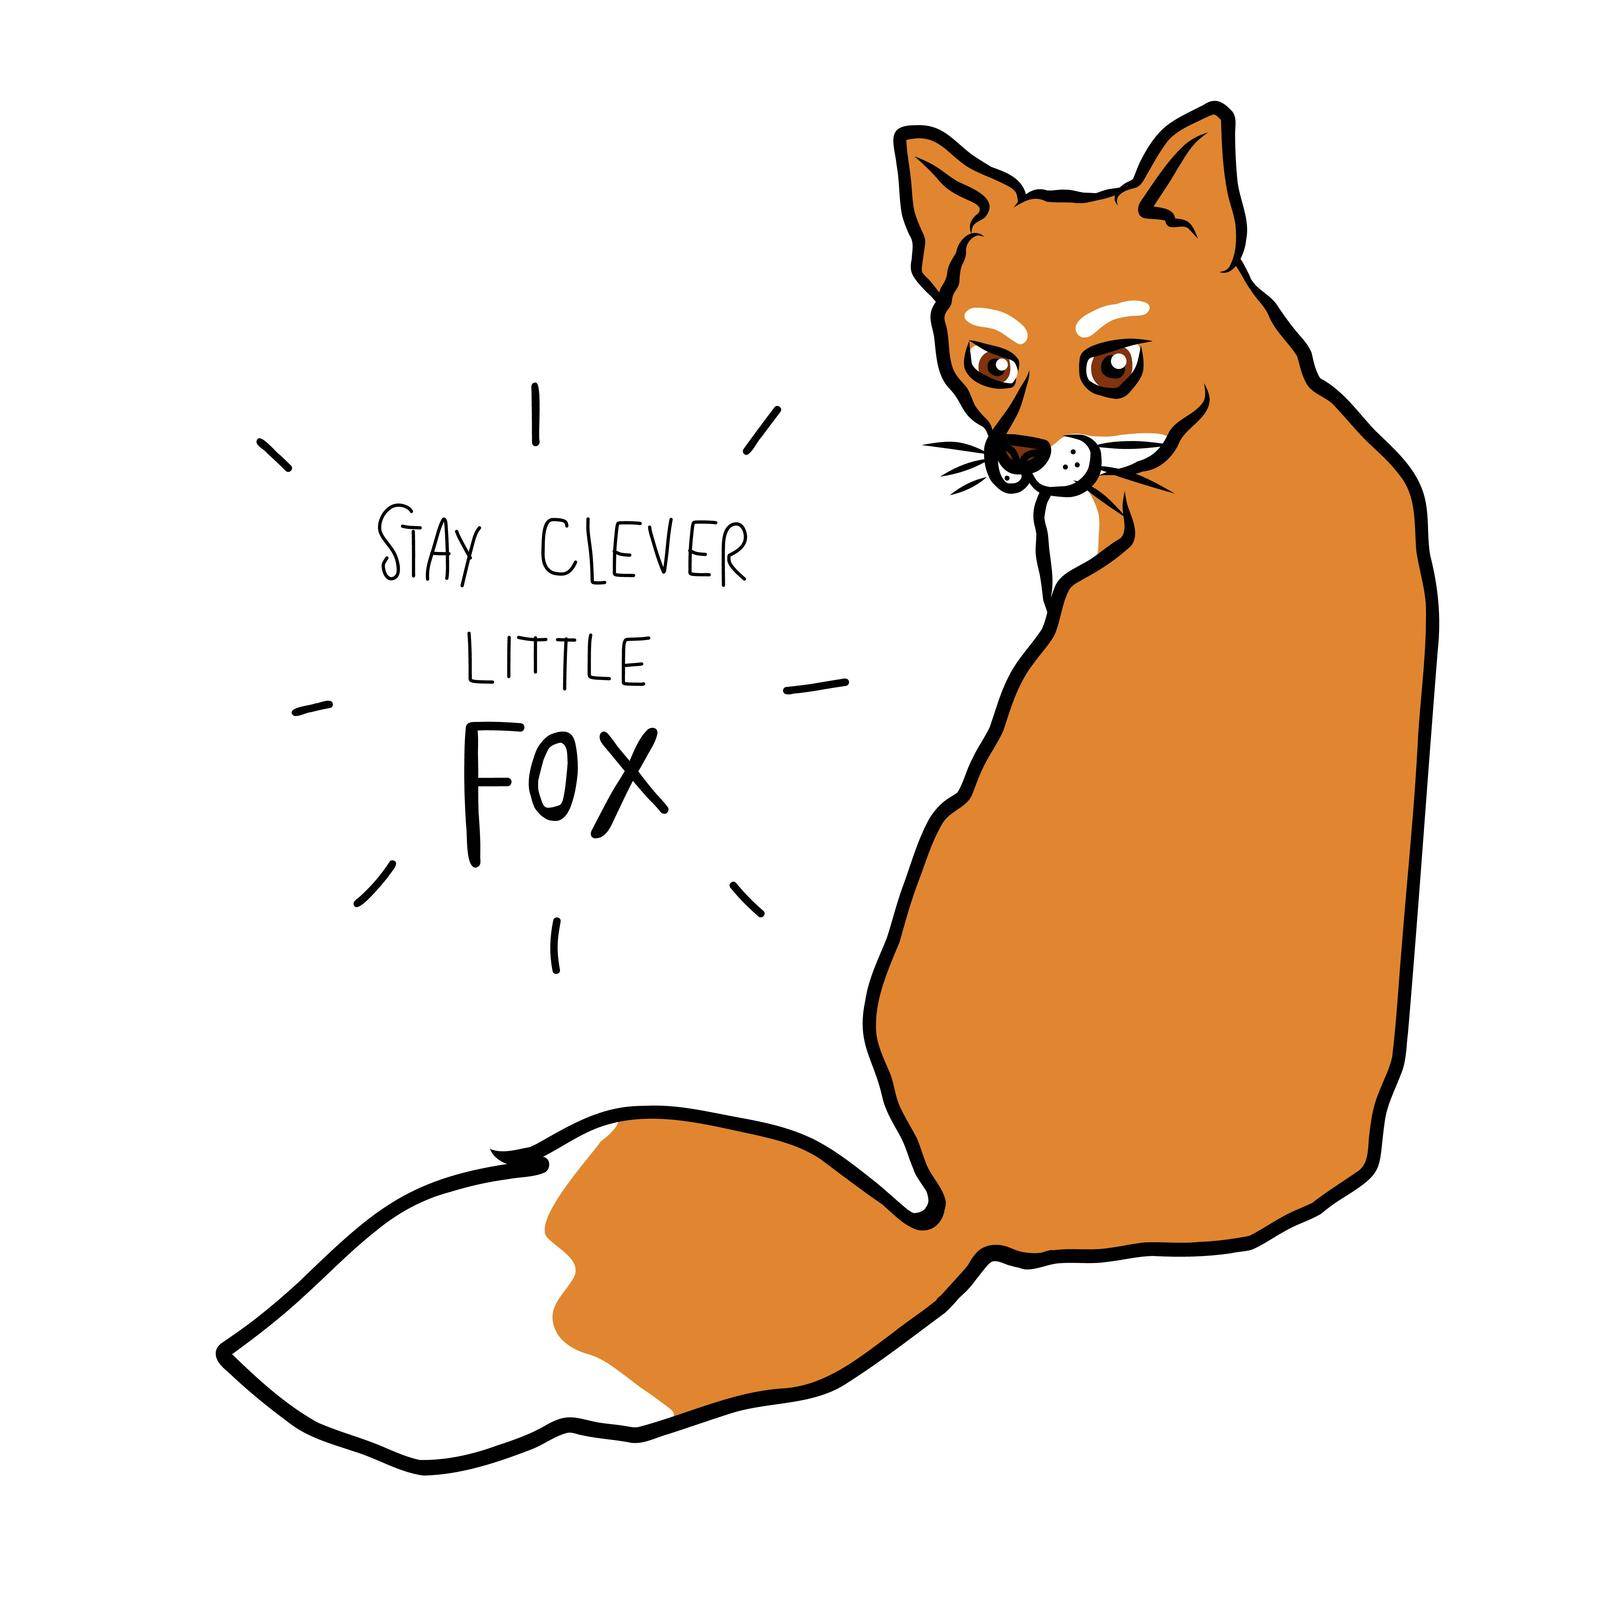 Stay clever little fox cartoon vector illustration by Yoopho